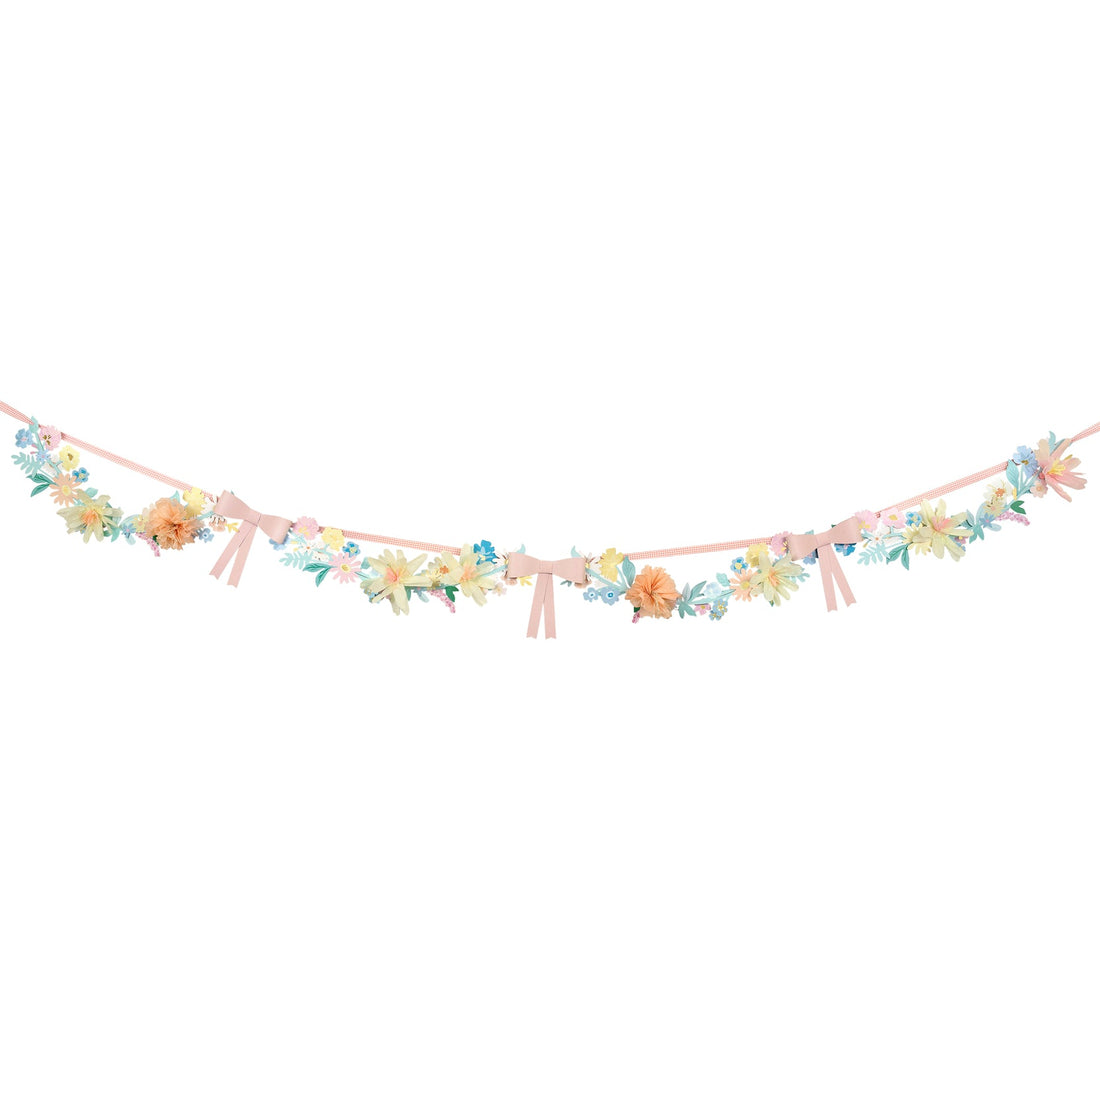 A Meri Meri Flower &amp; Bow Garland adorned with a delightful mix of beautiful flowers and charming bows.